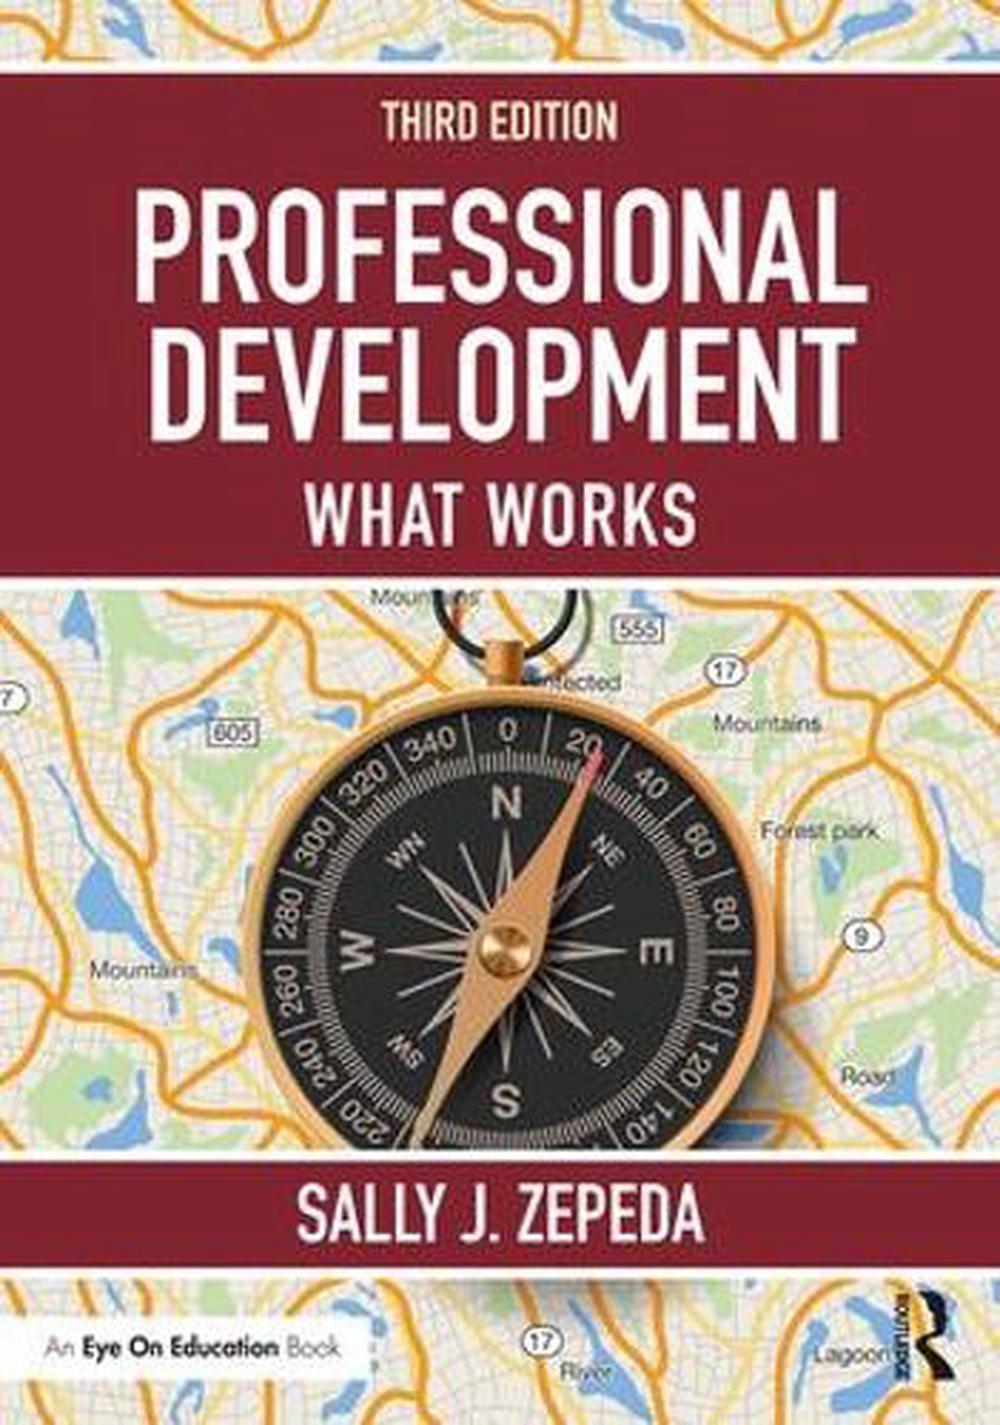 Professional Development What Works by Sally J. Zepeda (English